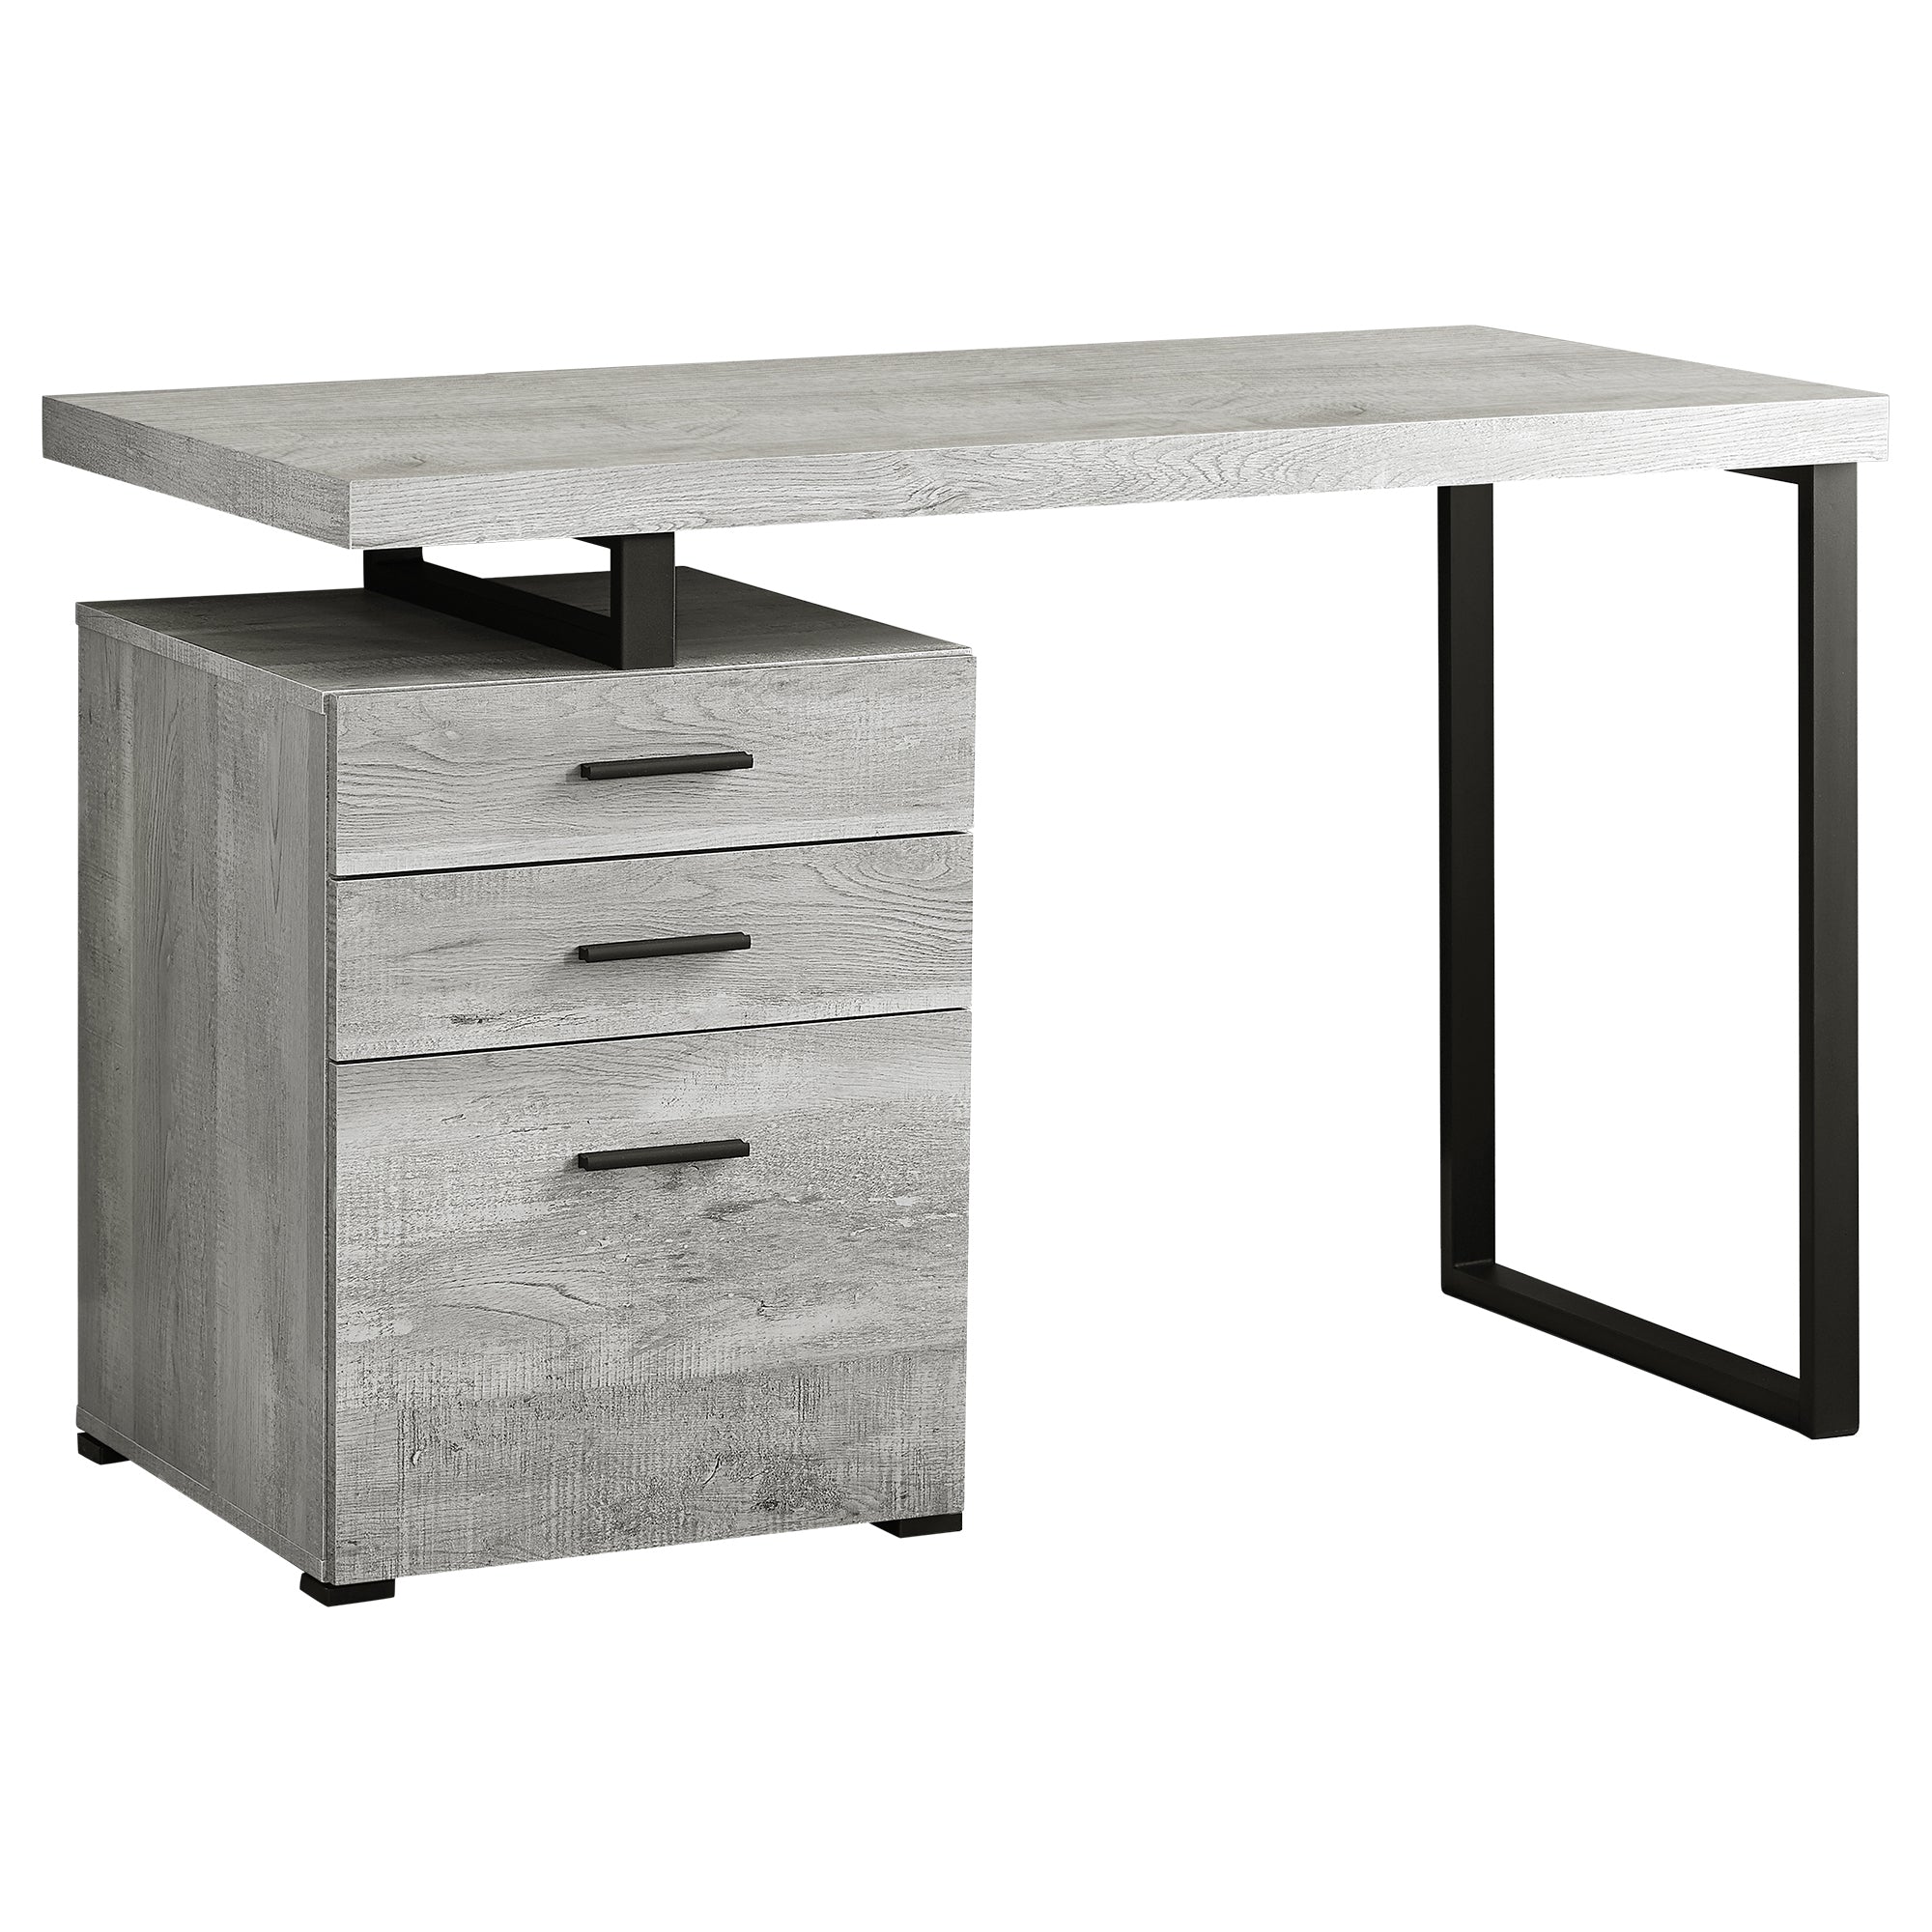 MN-757409    Computer Desk, Home Office, Laptop, Left, Right Set-Up, Storage Drawers, 48"L, Metal, Laminate, Grey Reclaimed Wood Look, Black, Contemporary, Modern